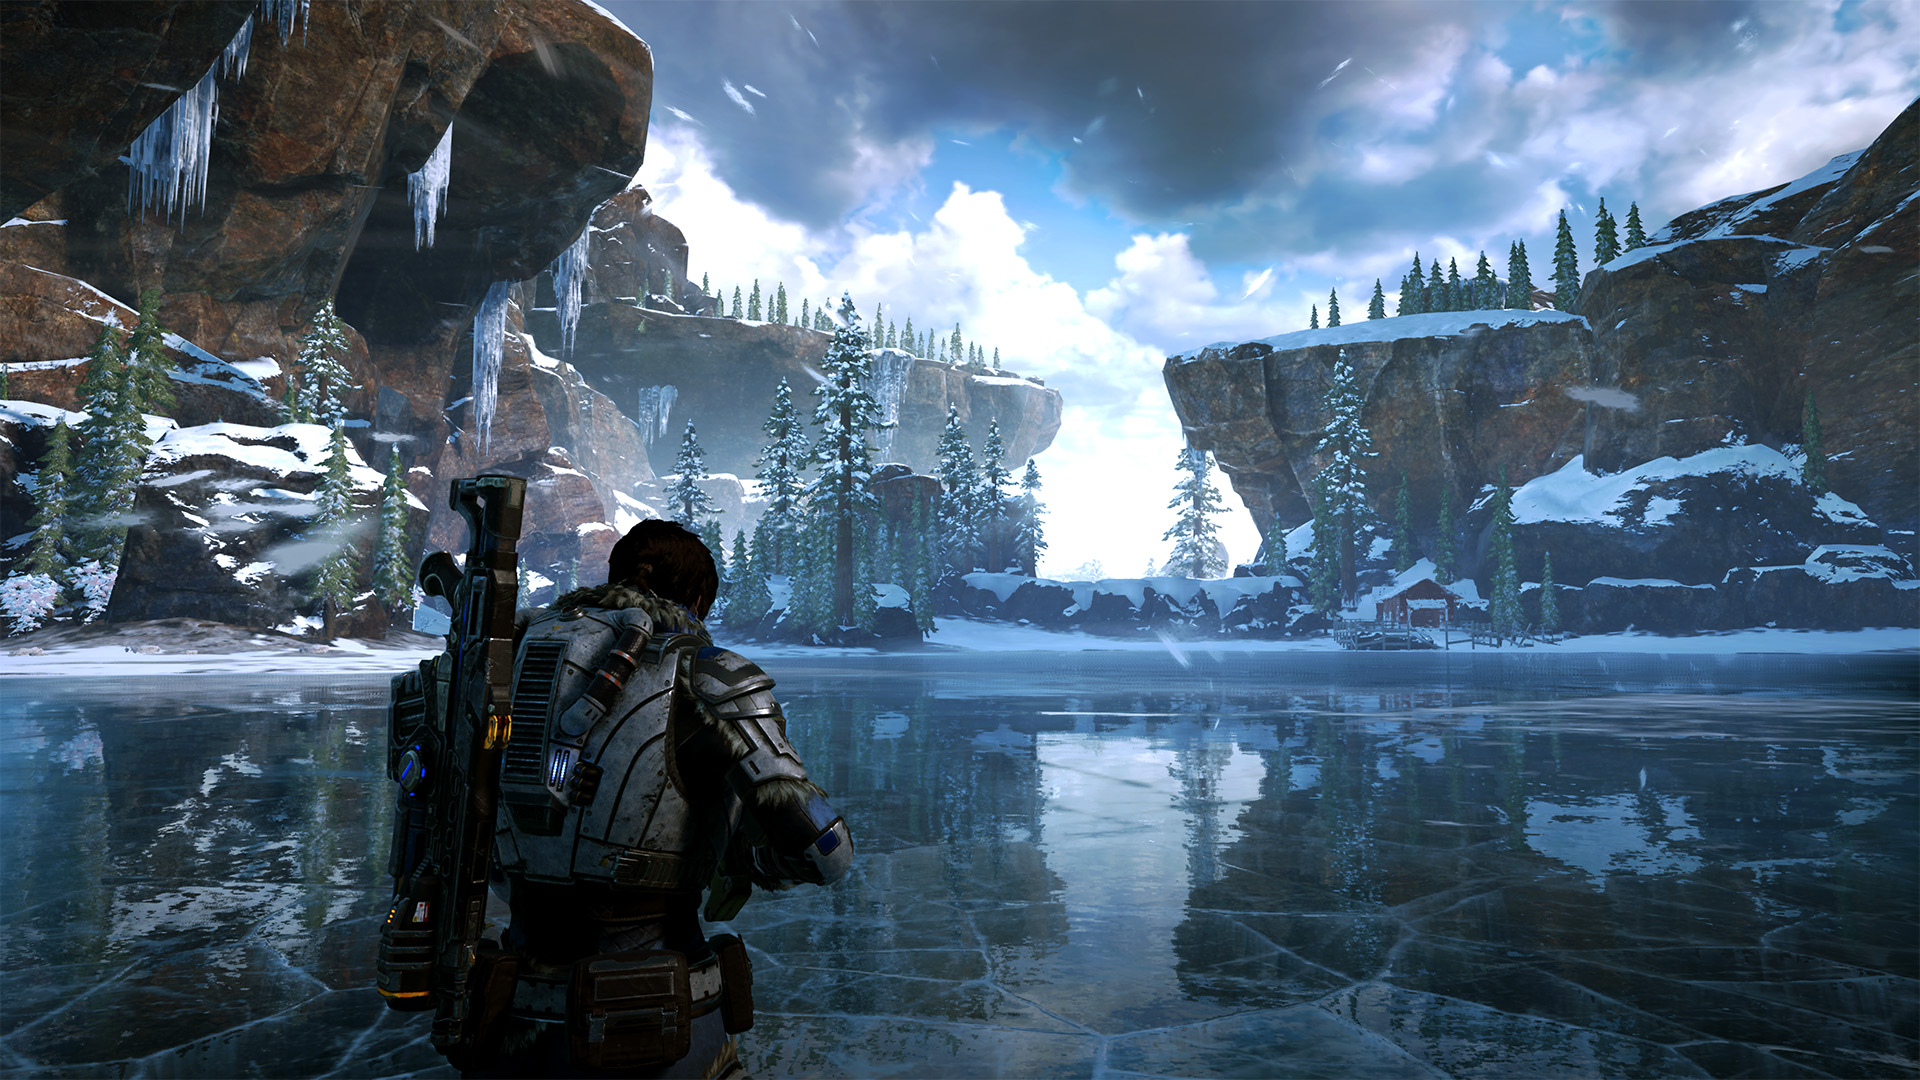 Screenshot for the game Gears 5: Ultimate Edition [v 1.1.97.0 + DLCs] (2019) download torrent RePack by R.G. Mechanics